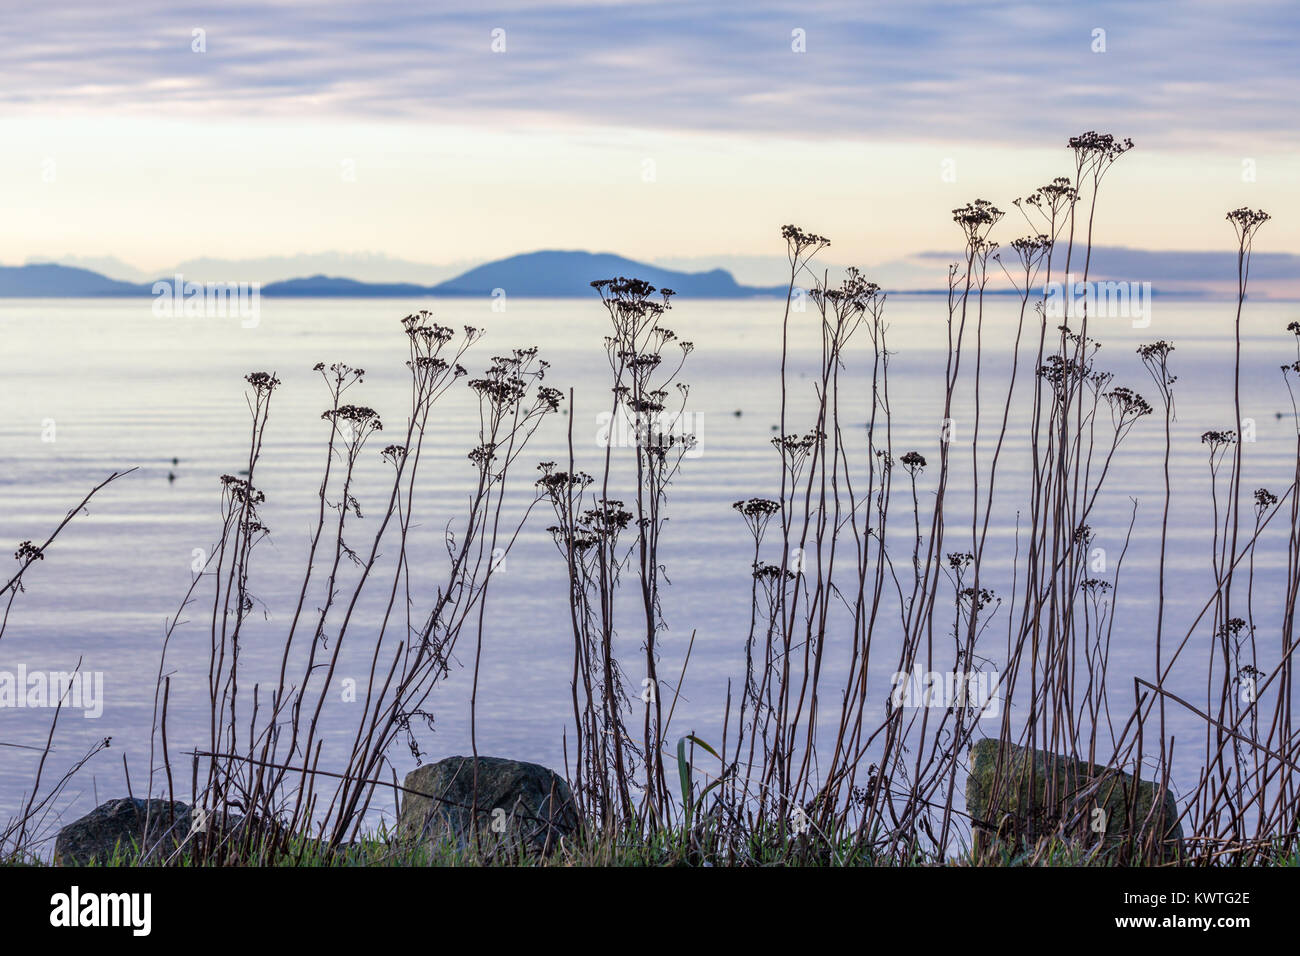 Dry flowers on long stems form delicate silhouettes on shore of Semiahmoo Bay with a view to blue, undulating hills of Washington's San Juan Islands Stock Photo